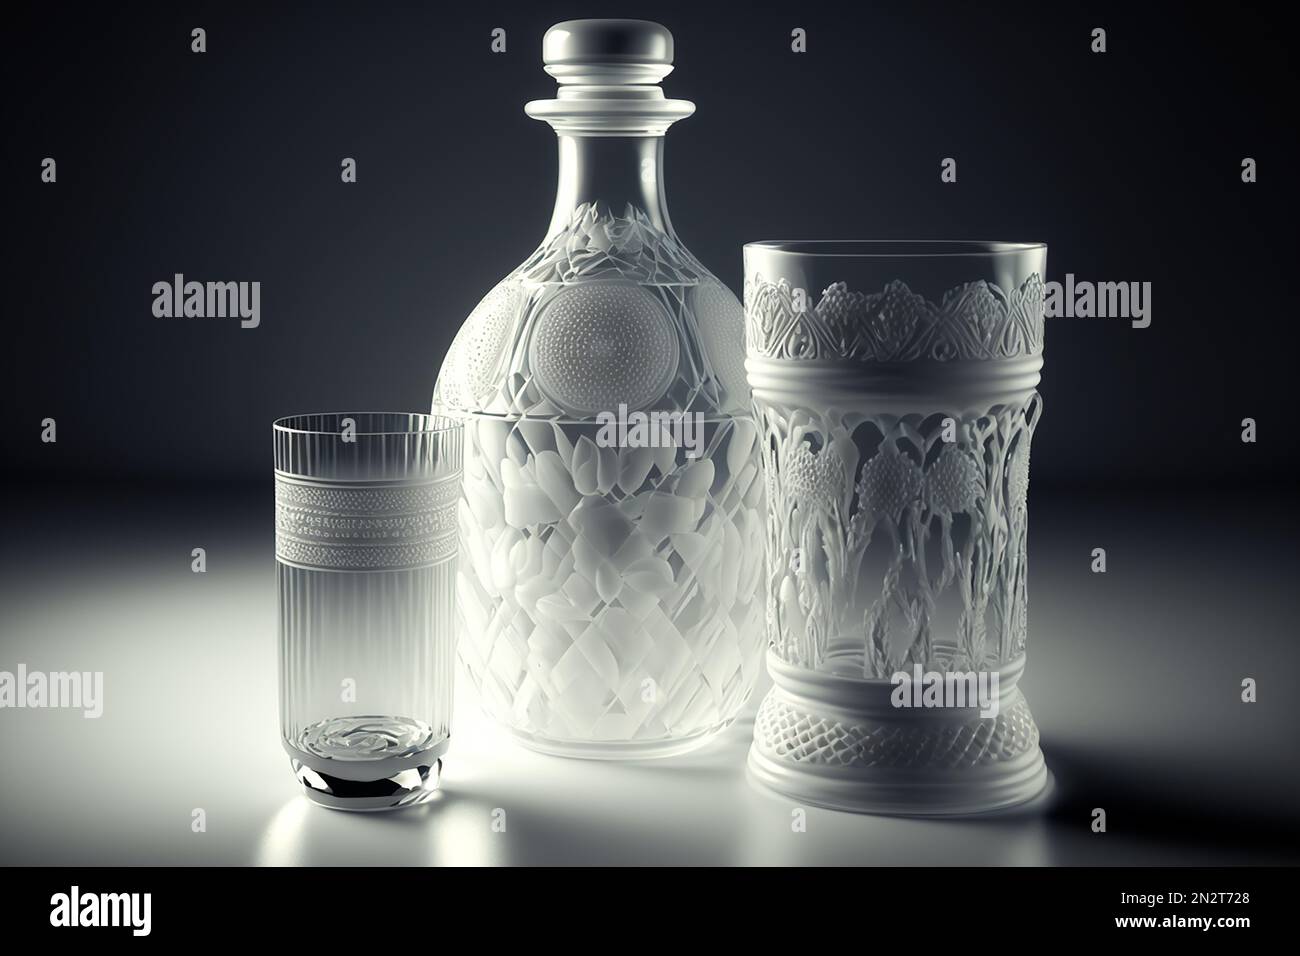 Glass carafe and two glasses with carved patterns Stock Photo